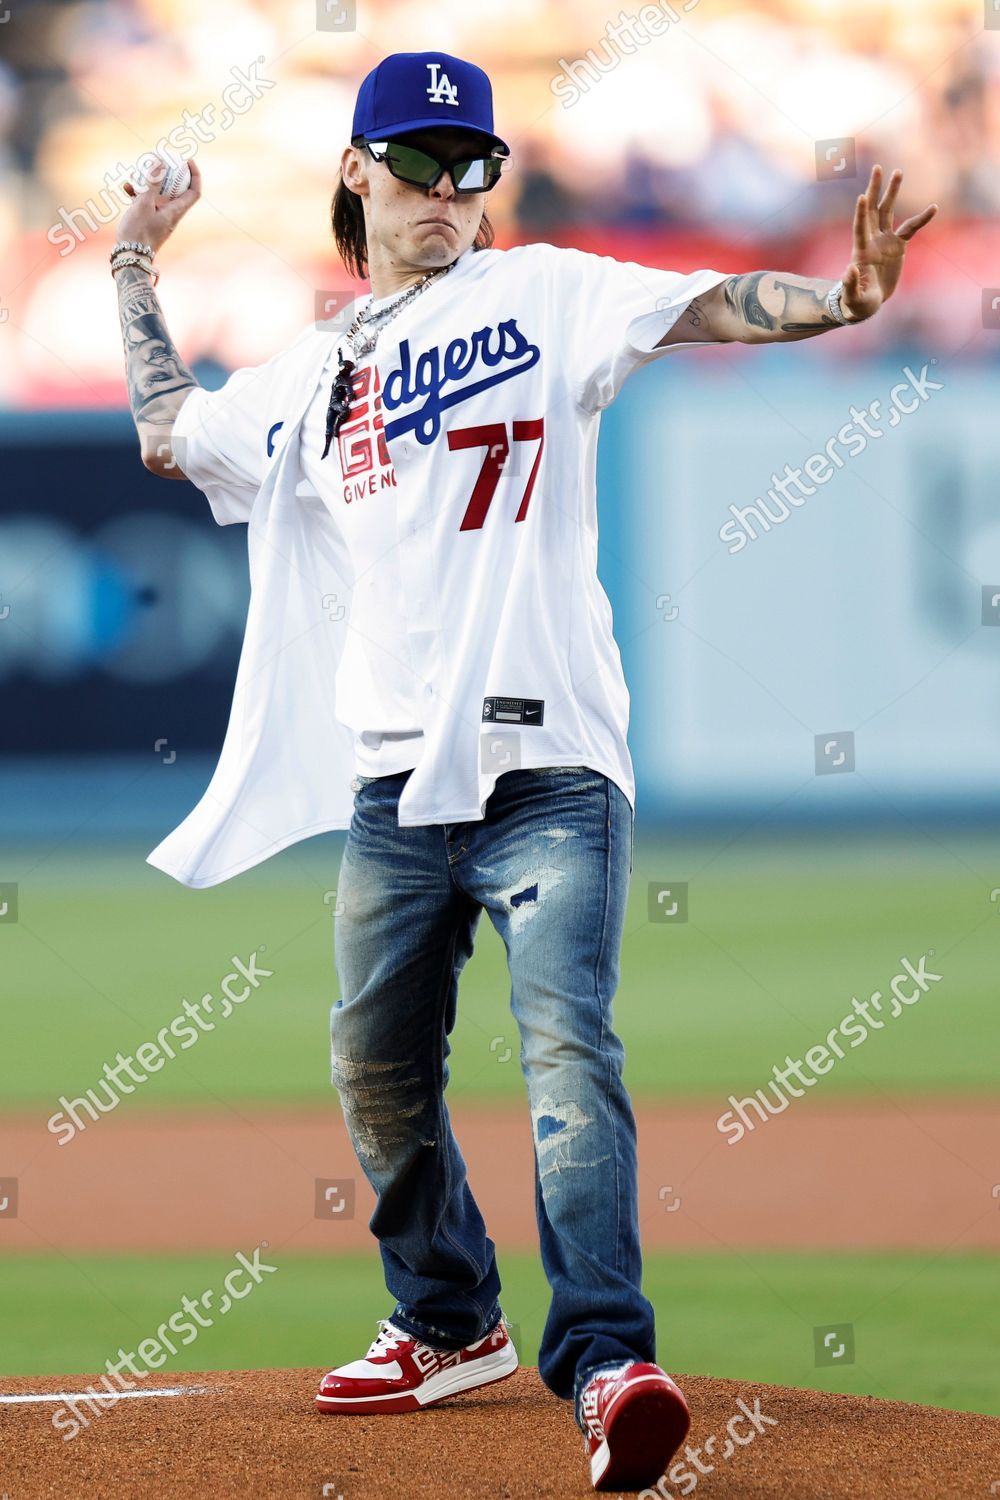 Dodgers News: Peso Pluma Throwing Out First Pitch At Dodger Stadium 